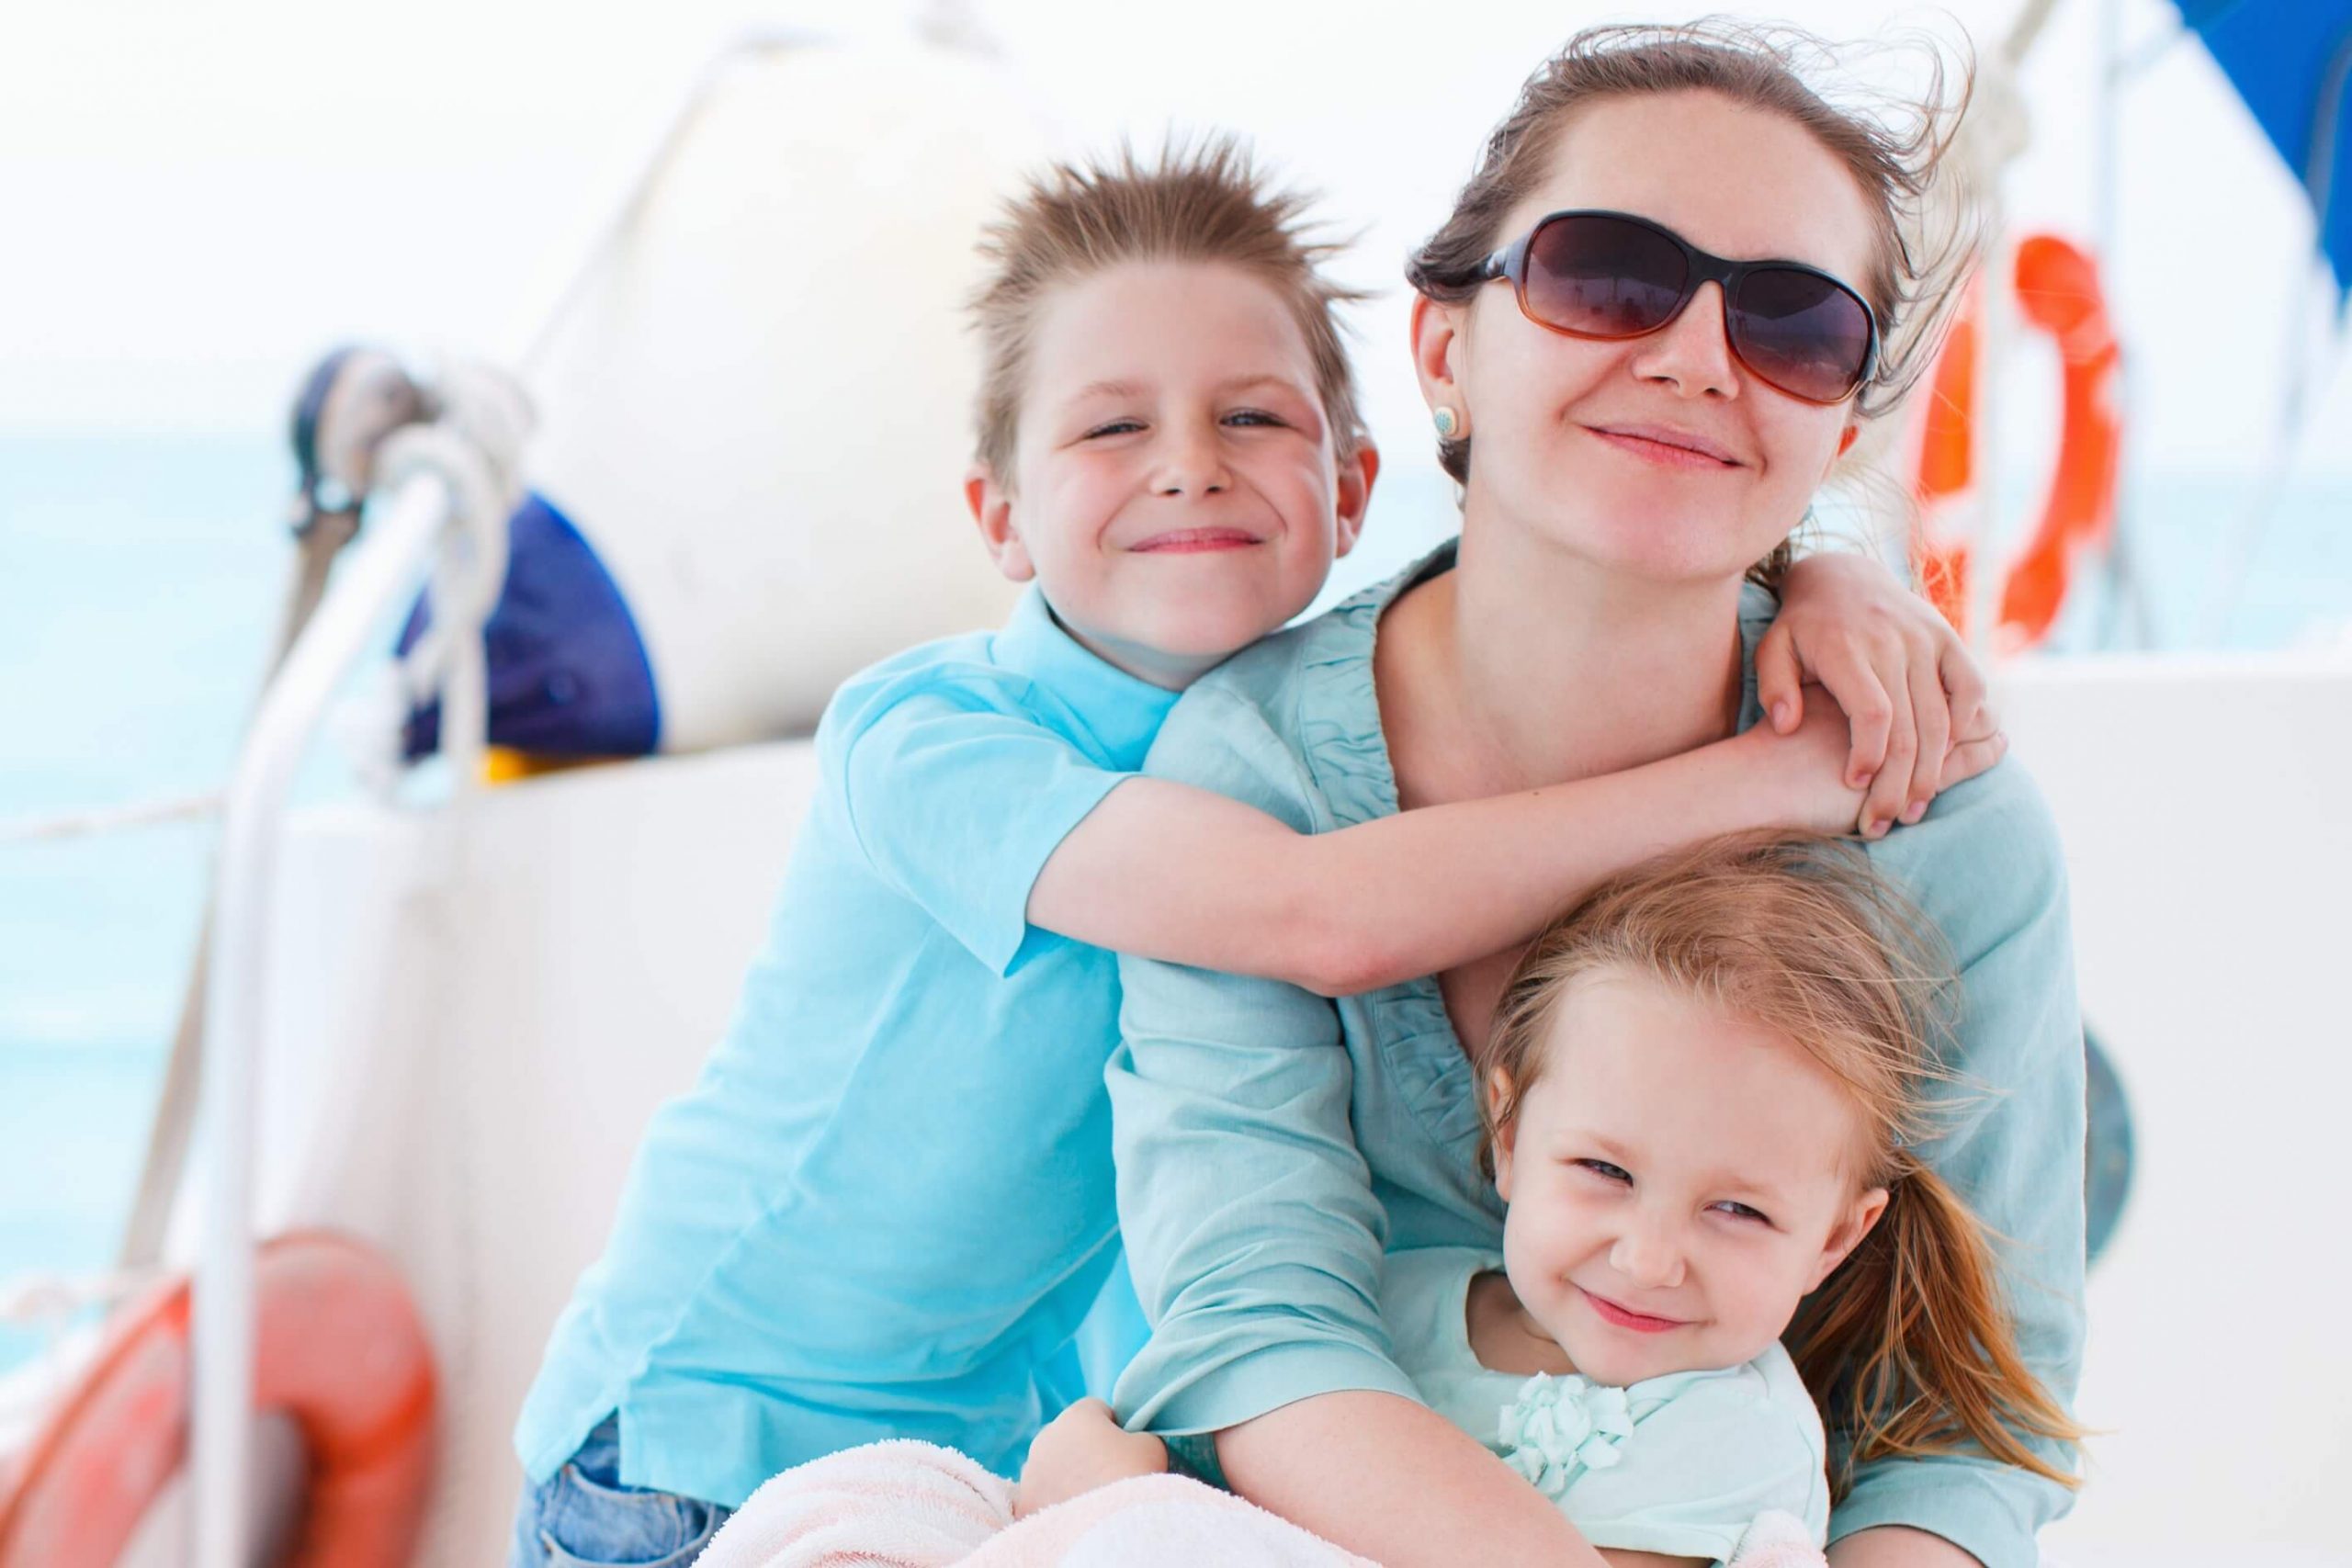 How To Plan The Best Luxury Vacation With Kids